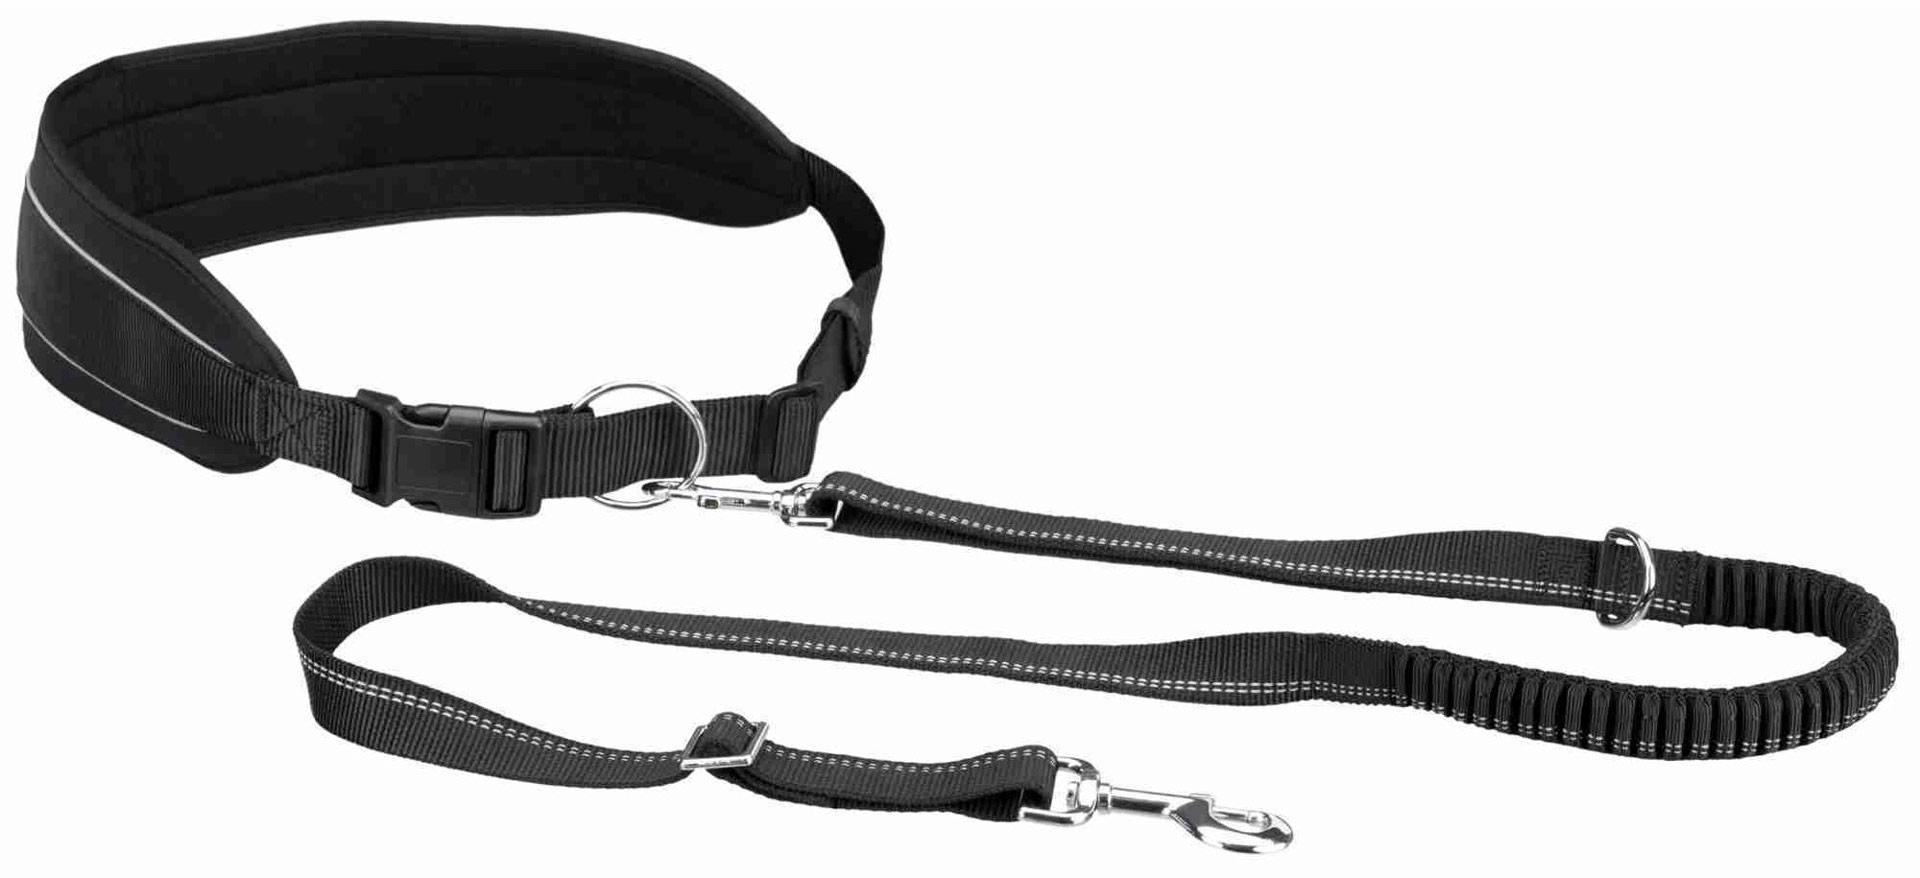 Running belt with a leash